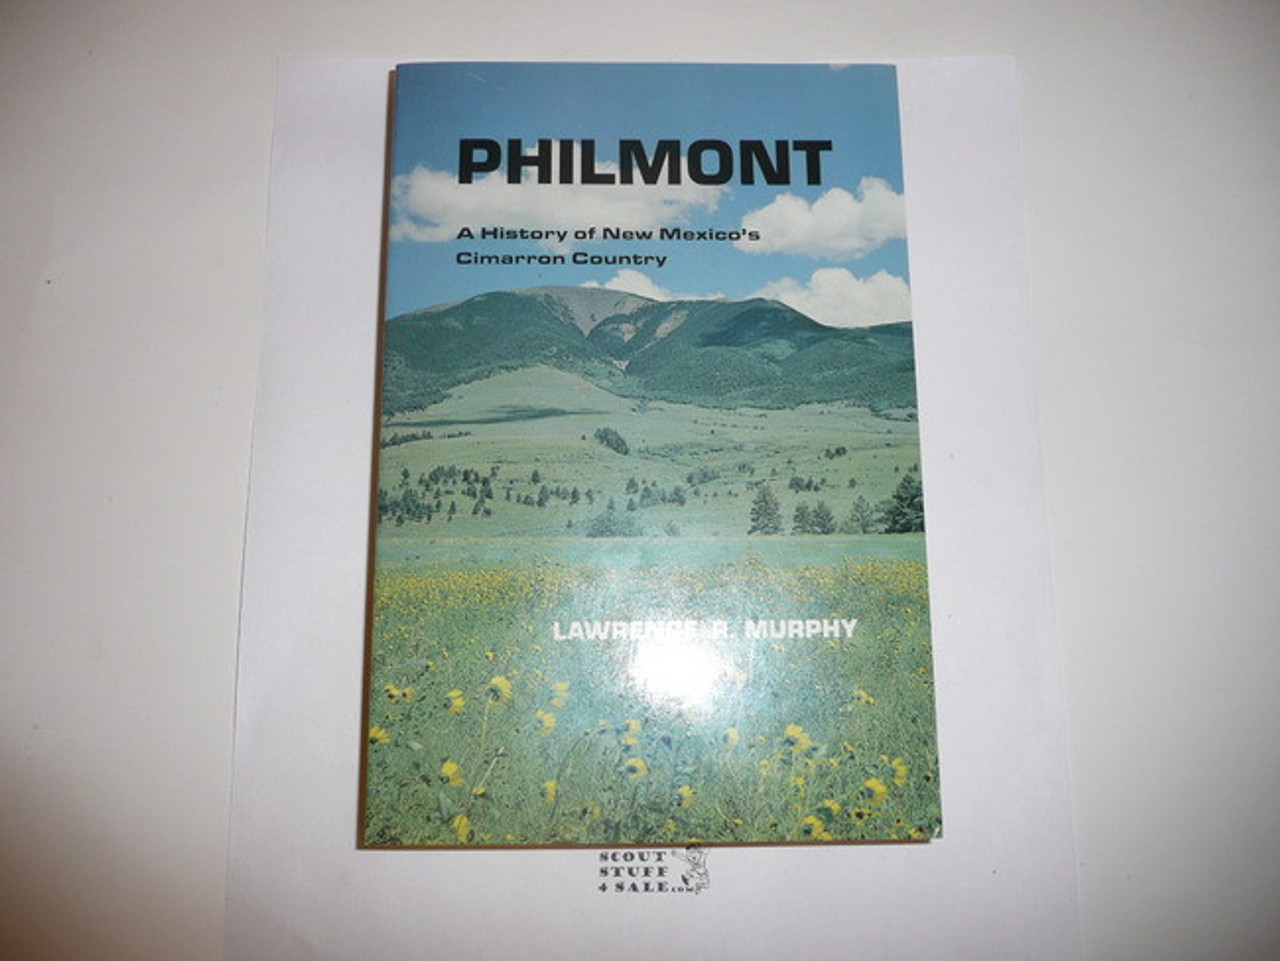 Philmont A History of New Mexico's Cimarron Country,7th printing, 1987